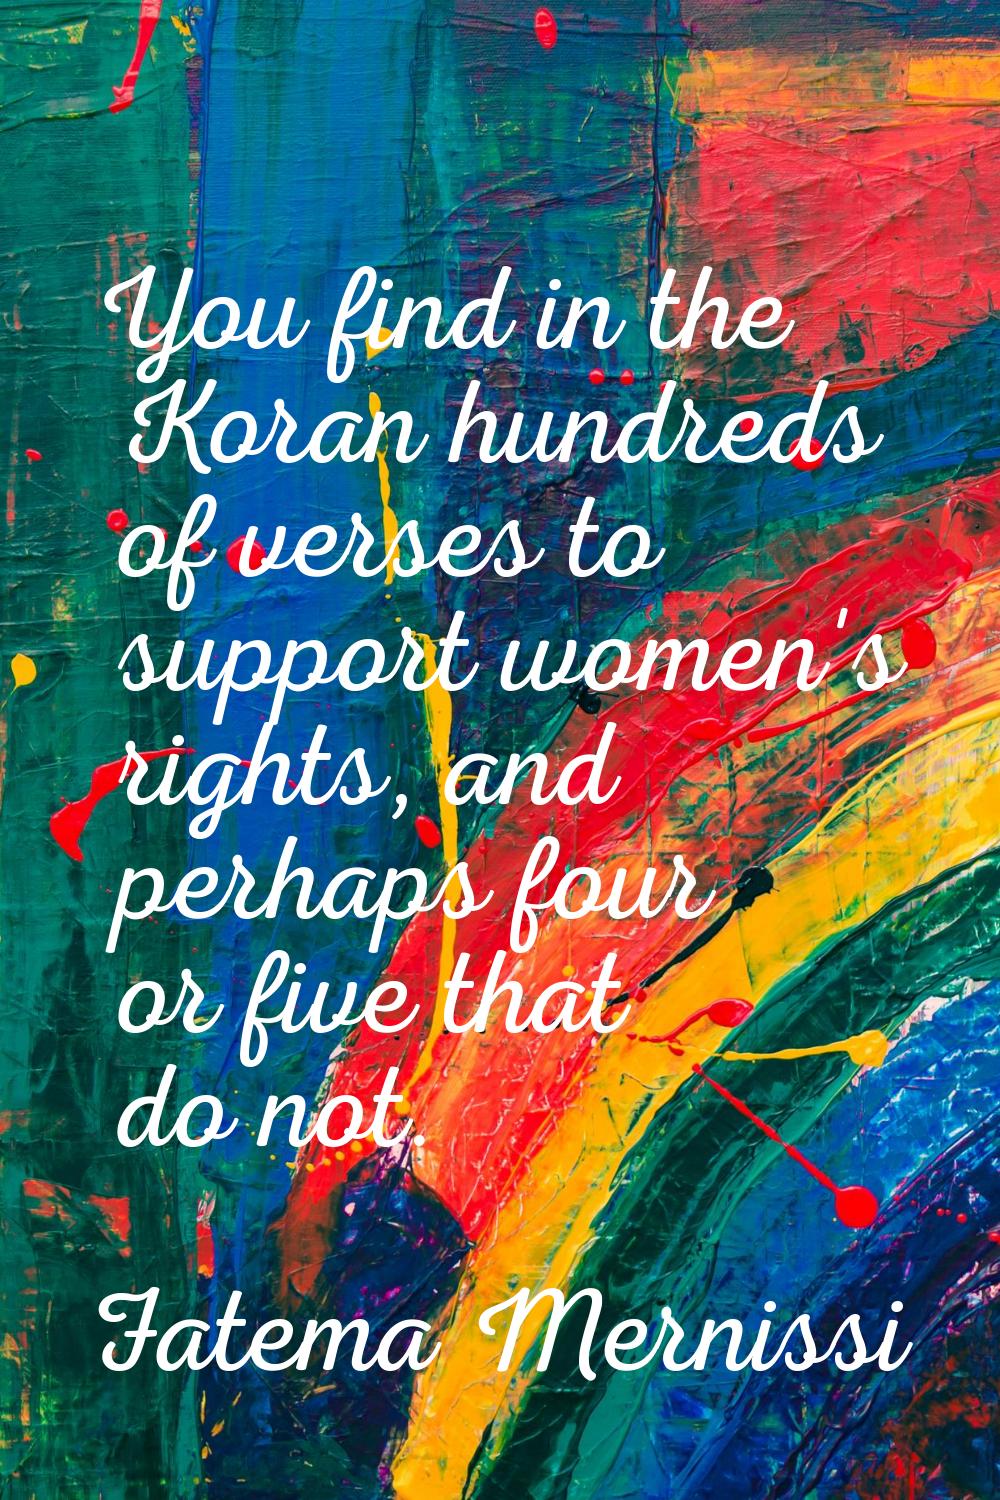 You find in the Koran hundreds of verses to support women's rights, and perhaps four or five that d